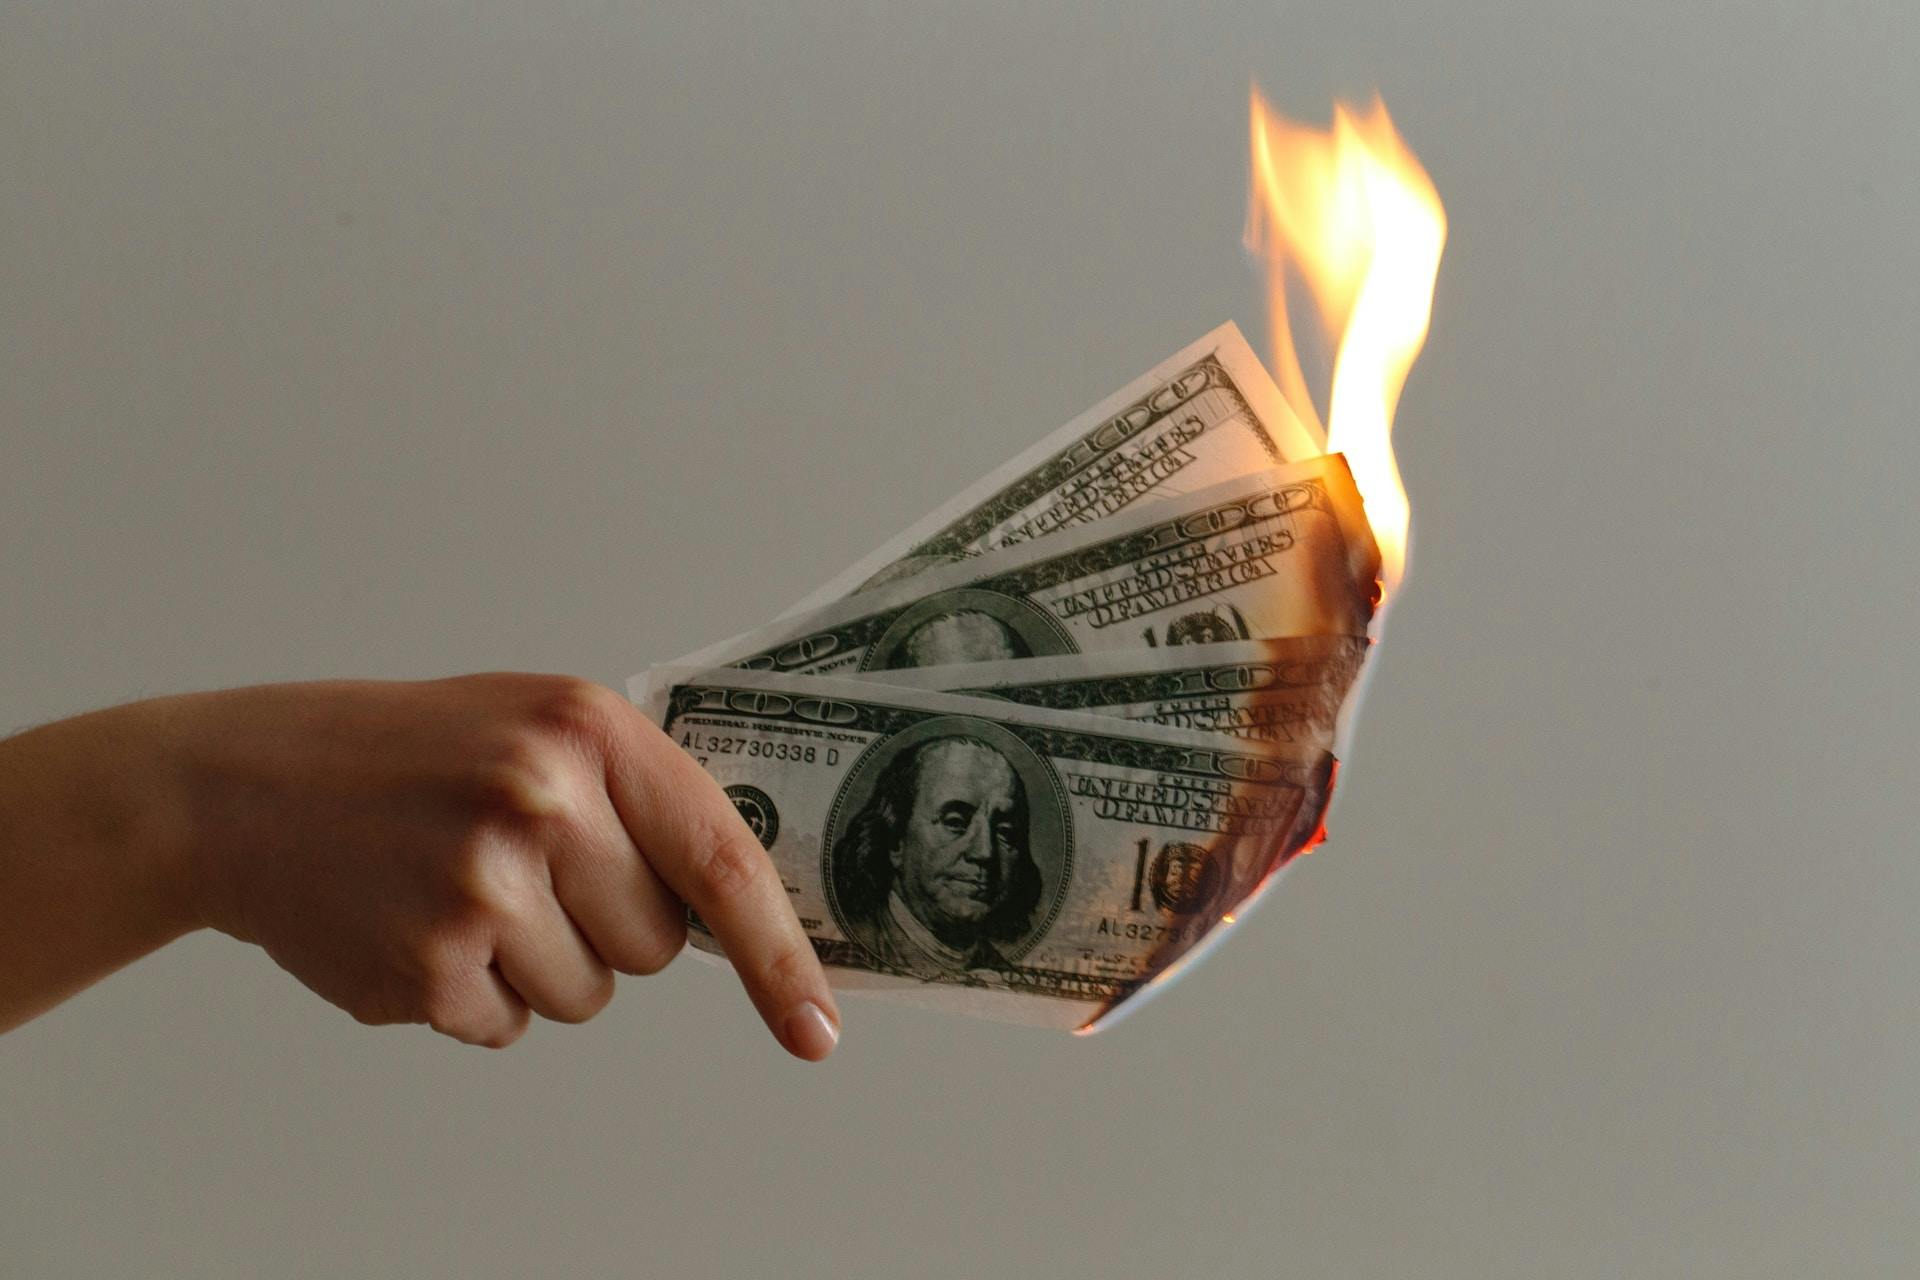  A hand holding burning cash